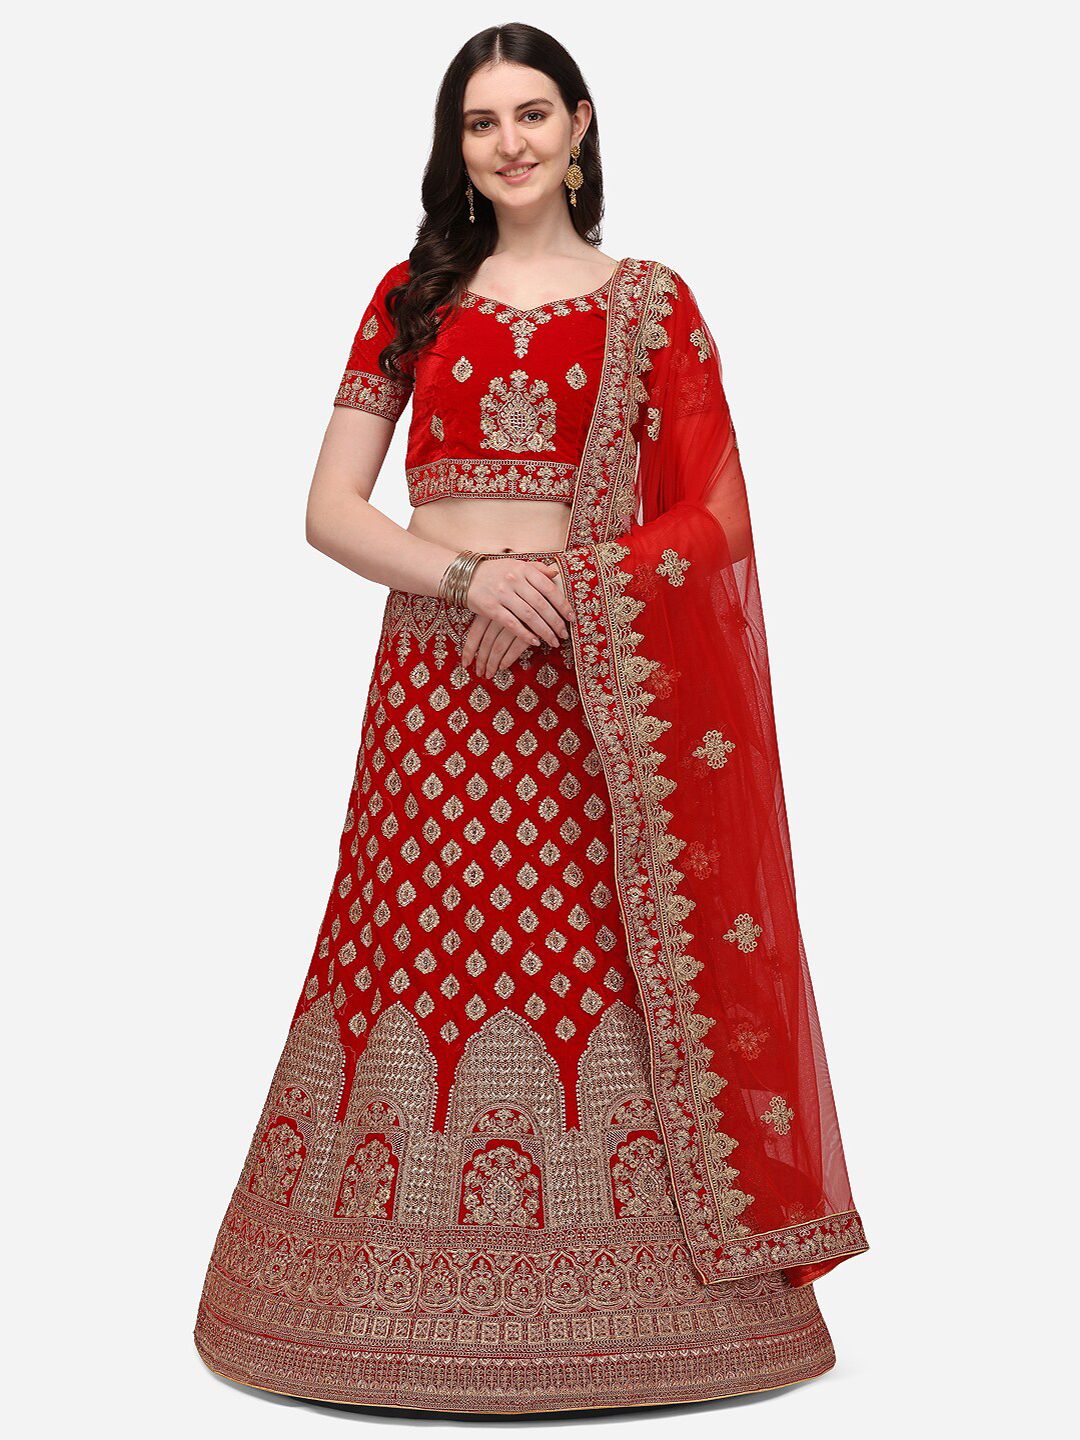 VRSALES Red & Gold-Toned Velvet Semi-Stitched Lehenga & Unstitched Blouse With Net Dupatta Price in India